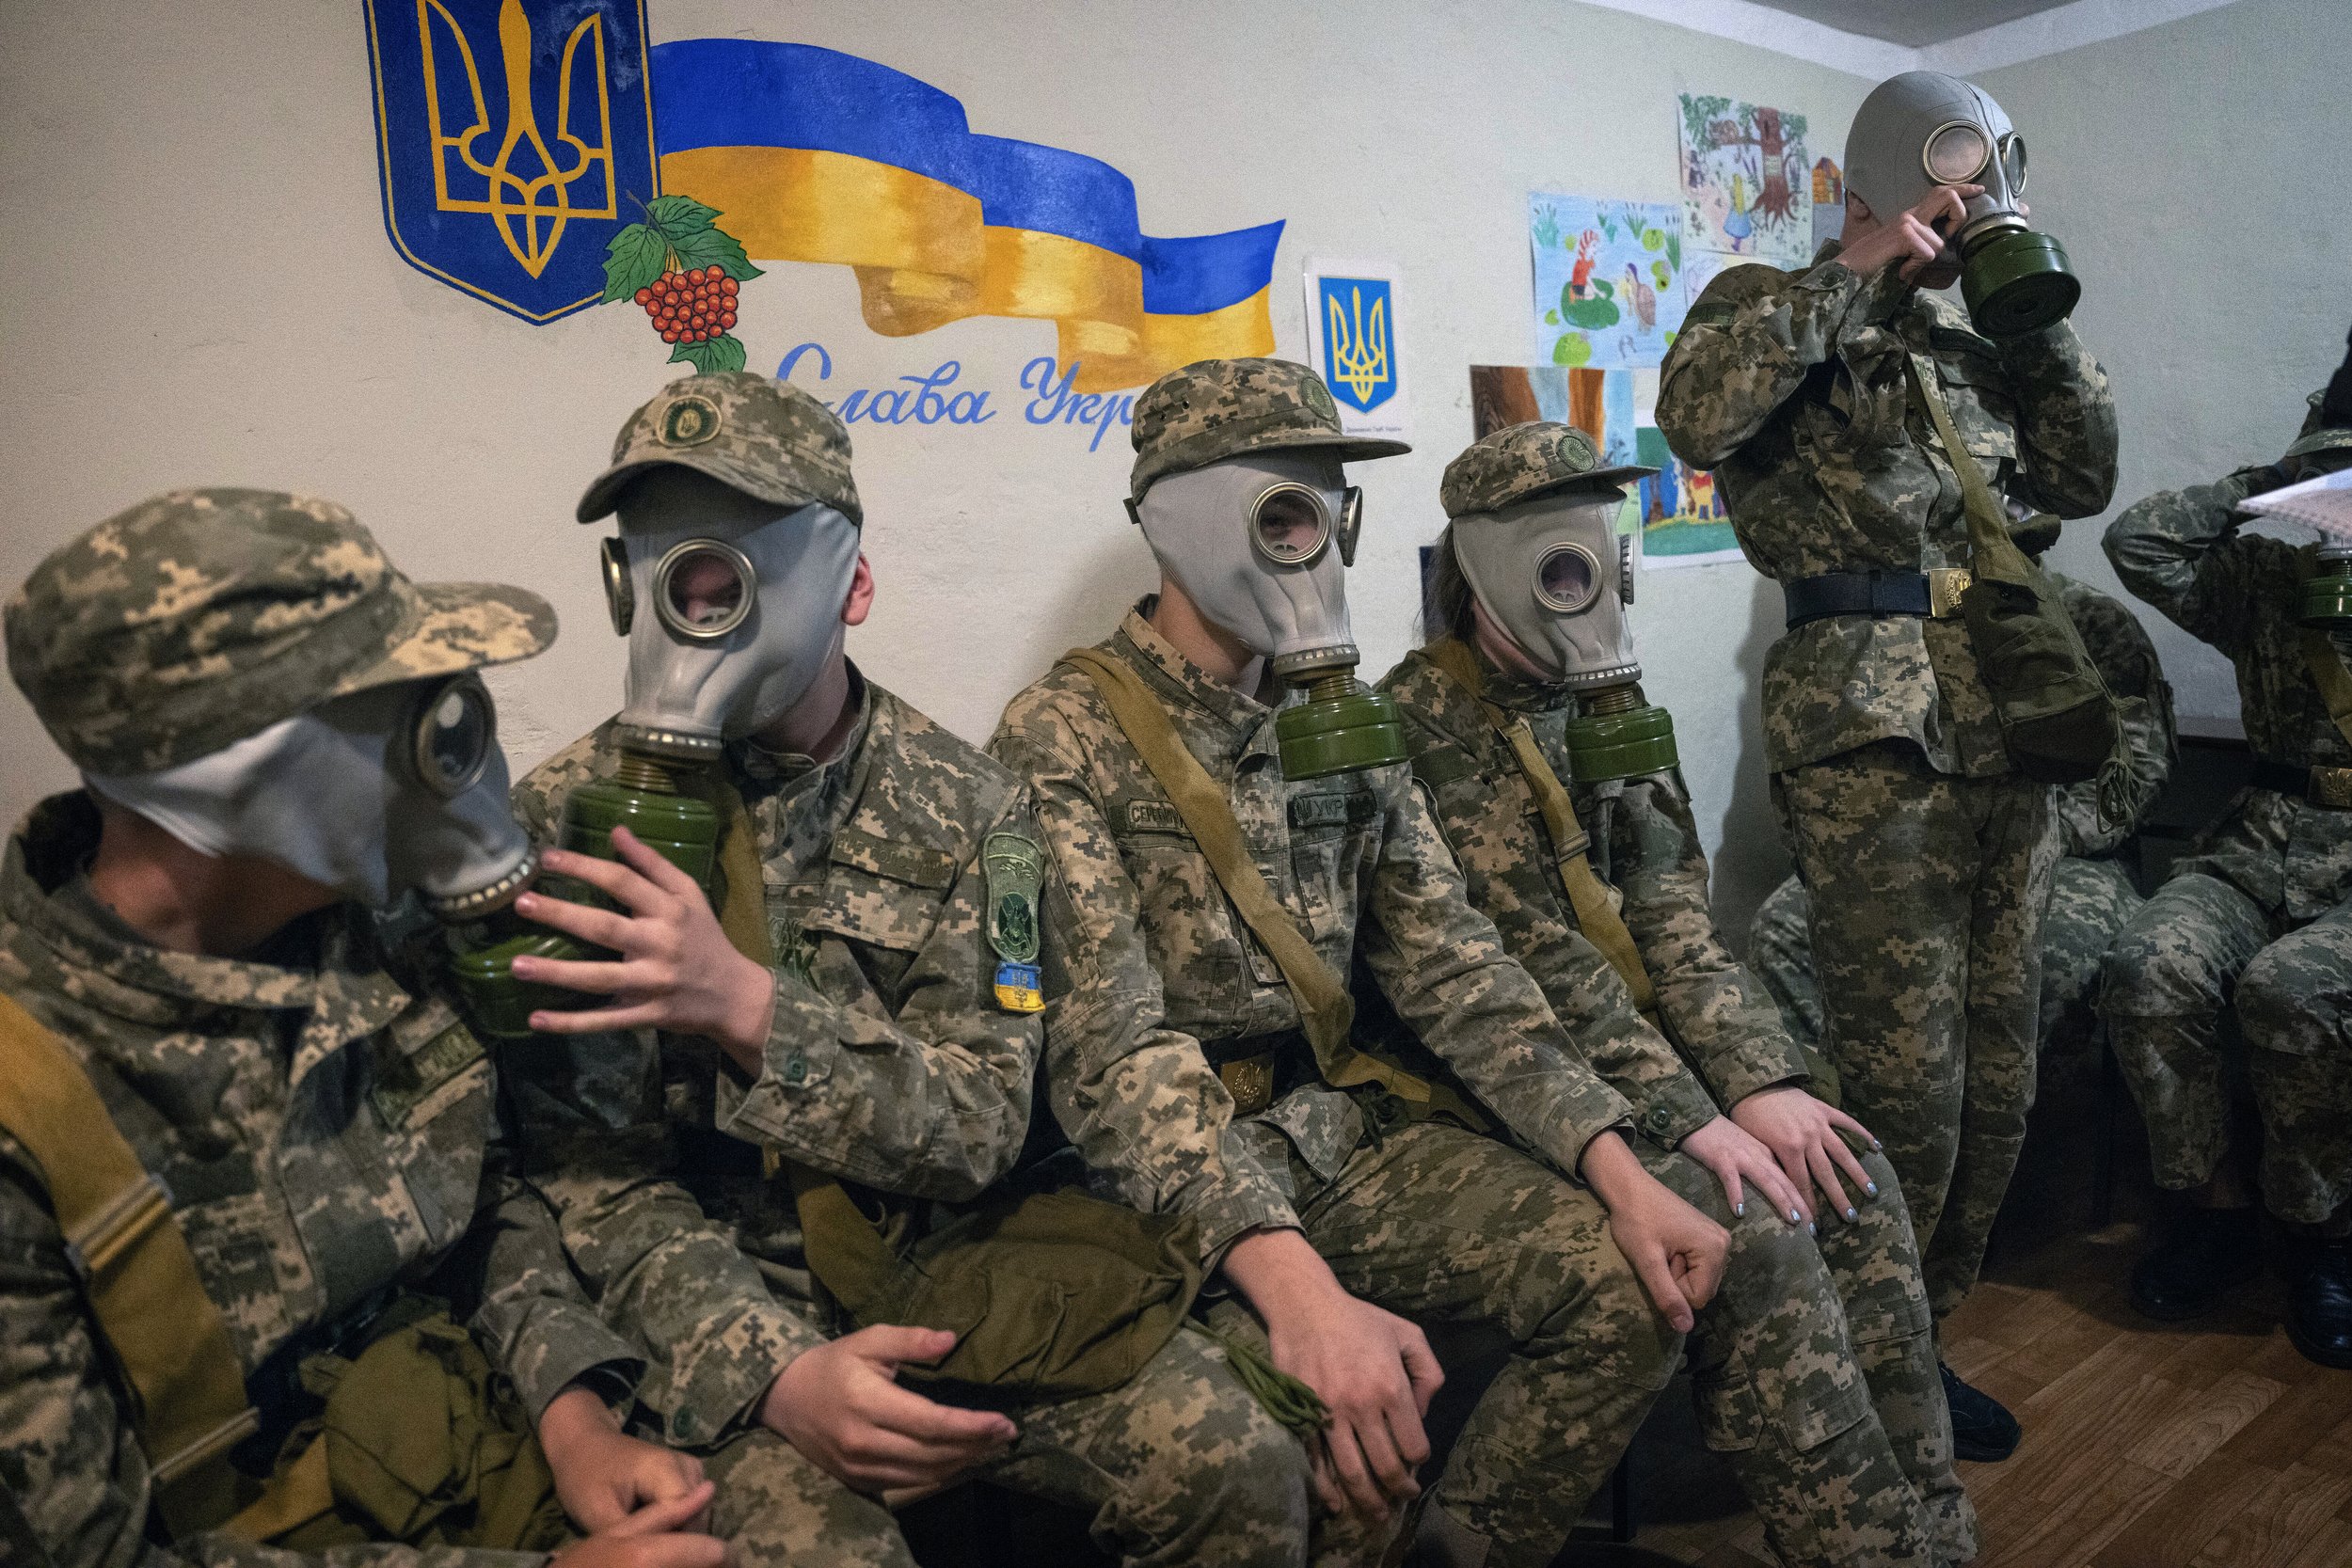  Cadets practice with gas masks during a lesson in a bomb shelter in a cadet lyceum in Kyiv, Ukraine, on June 6, 2023. (AP Photo/Efrem Lukatsky) 